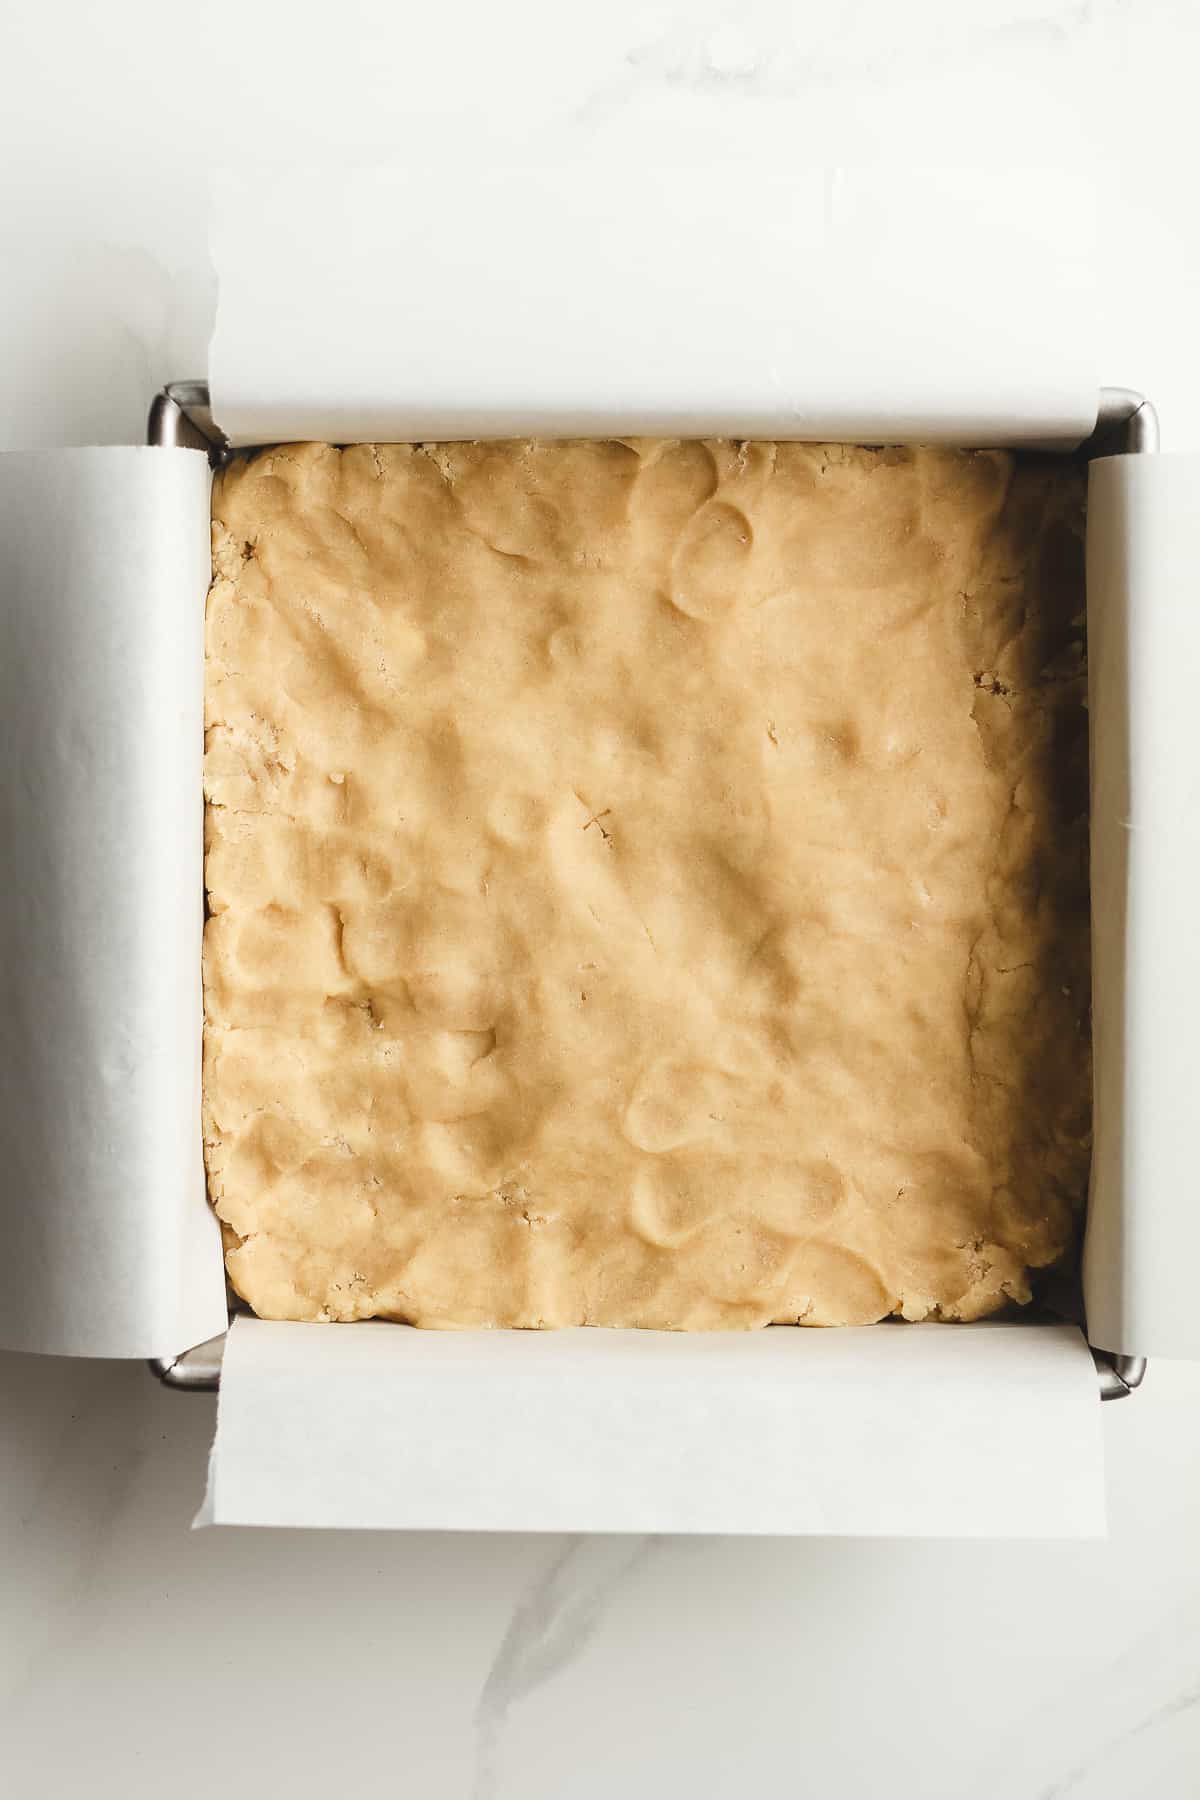 A pan of unbaked sugar cookie dough.